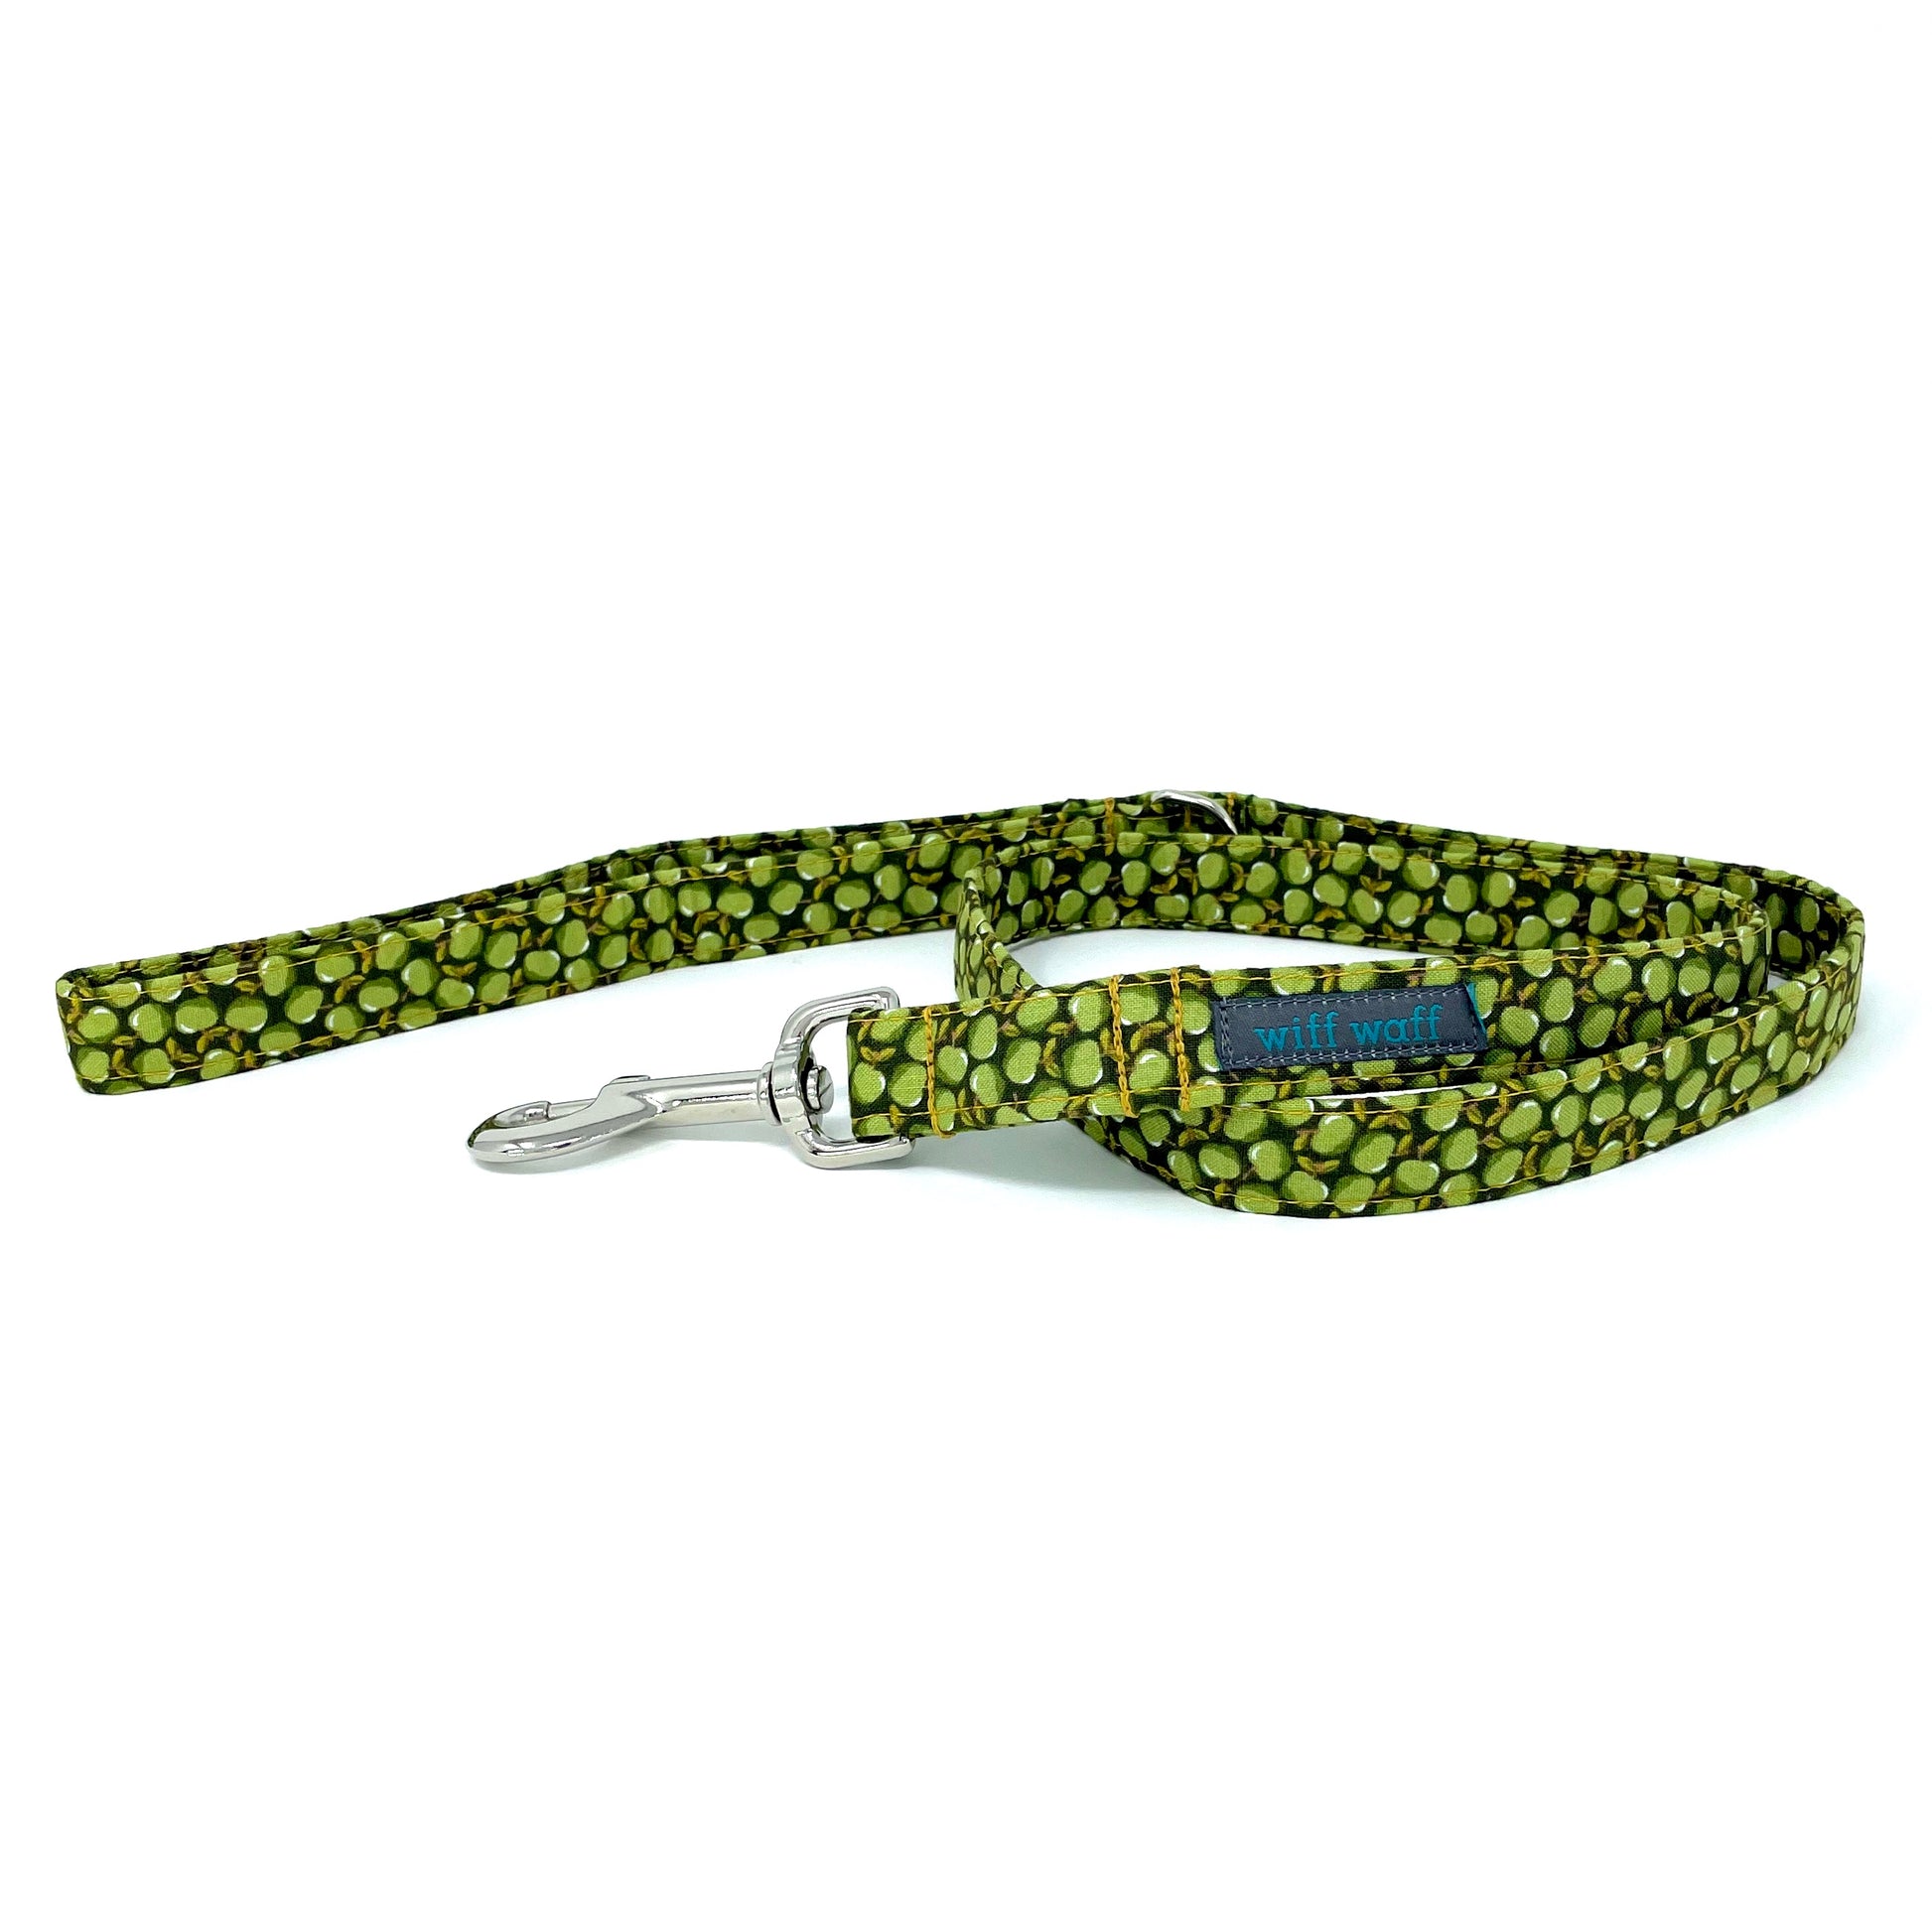 Green apple print dog lead with shiny chrome d ring and clip. Handcrafted by wiff waff designs.